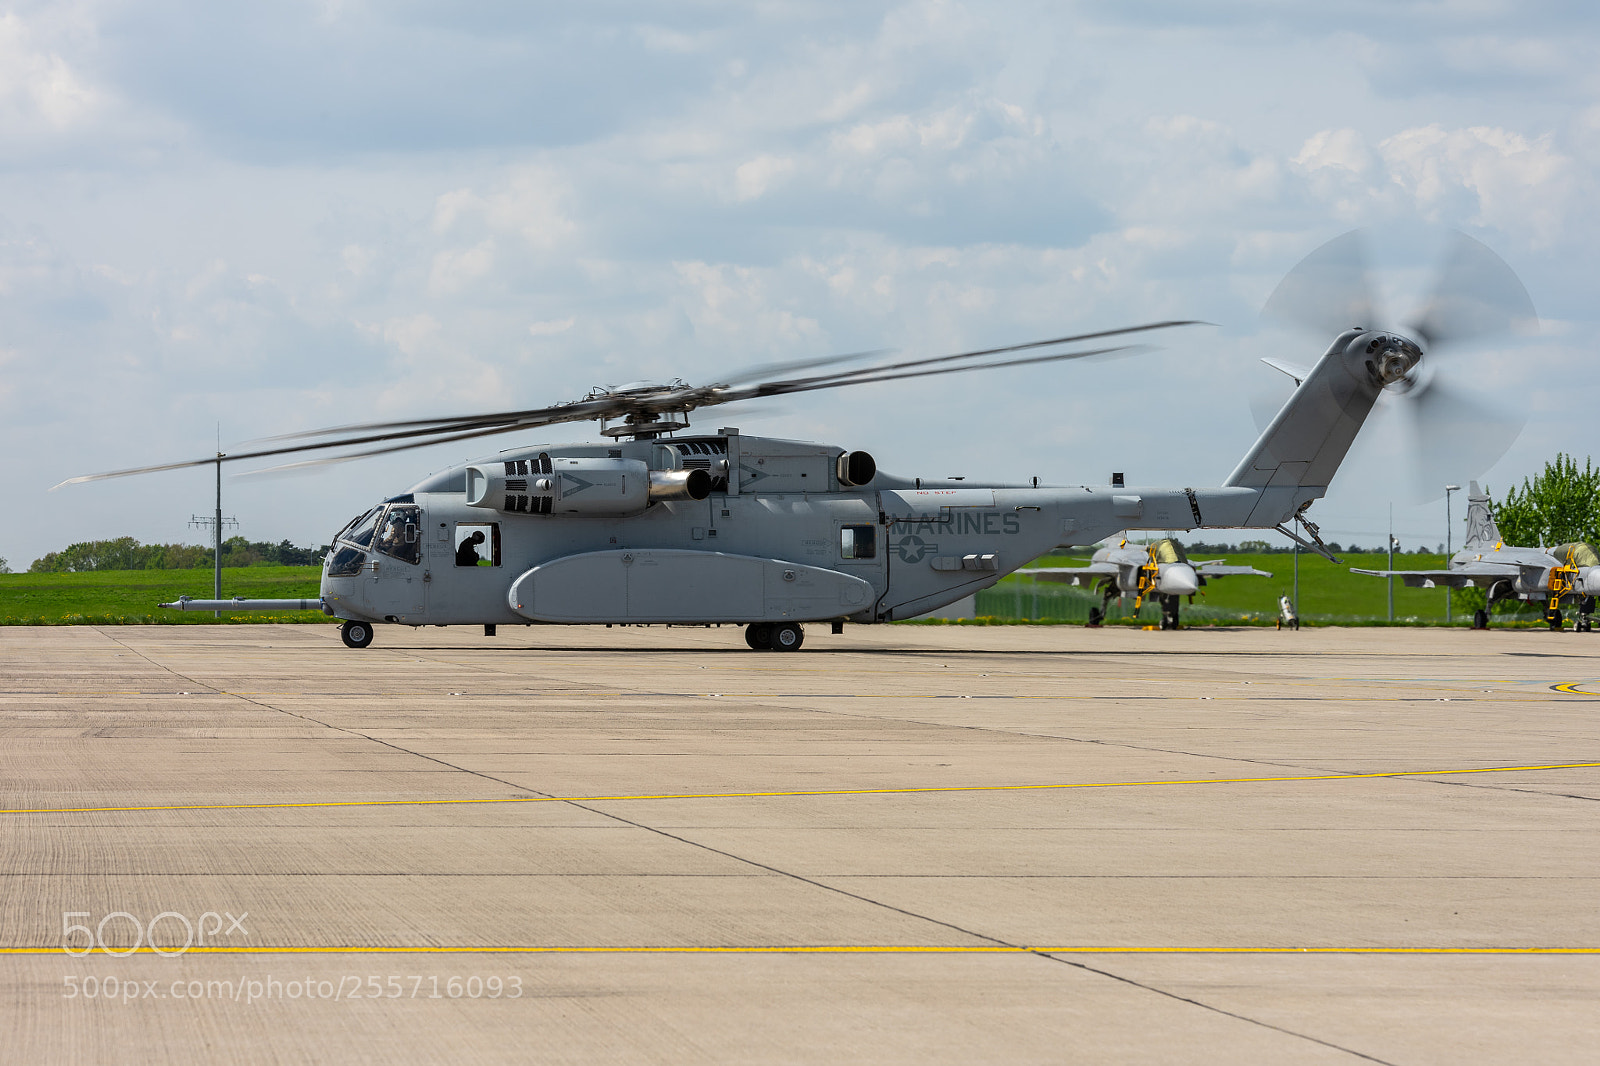 Sony a7 II sample photo. Heavy-lift cargo helicopter sikorsky photography